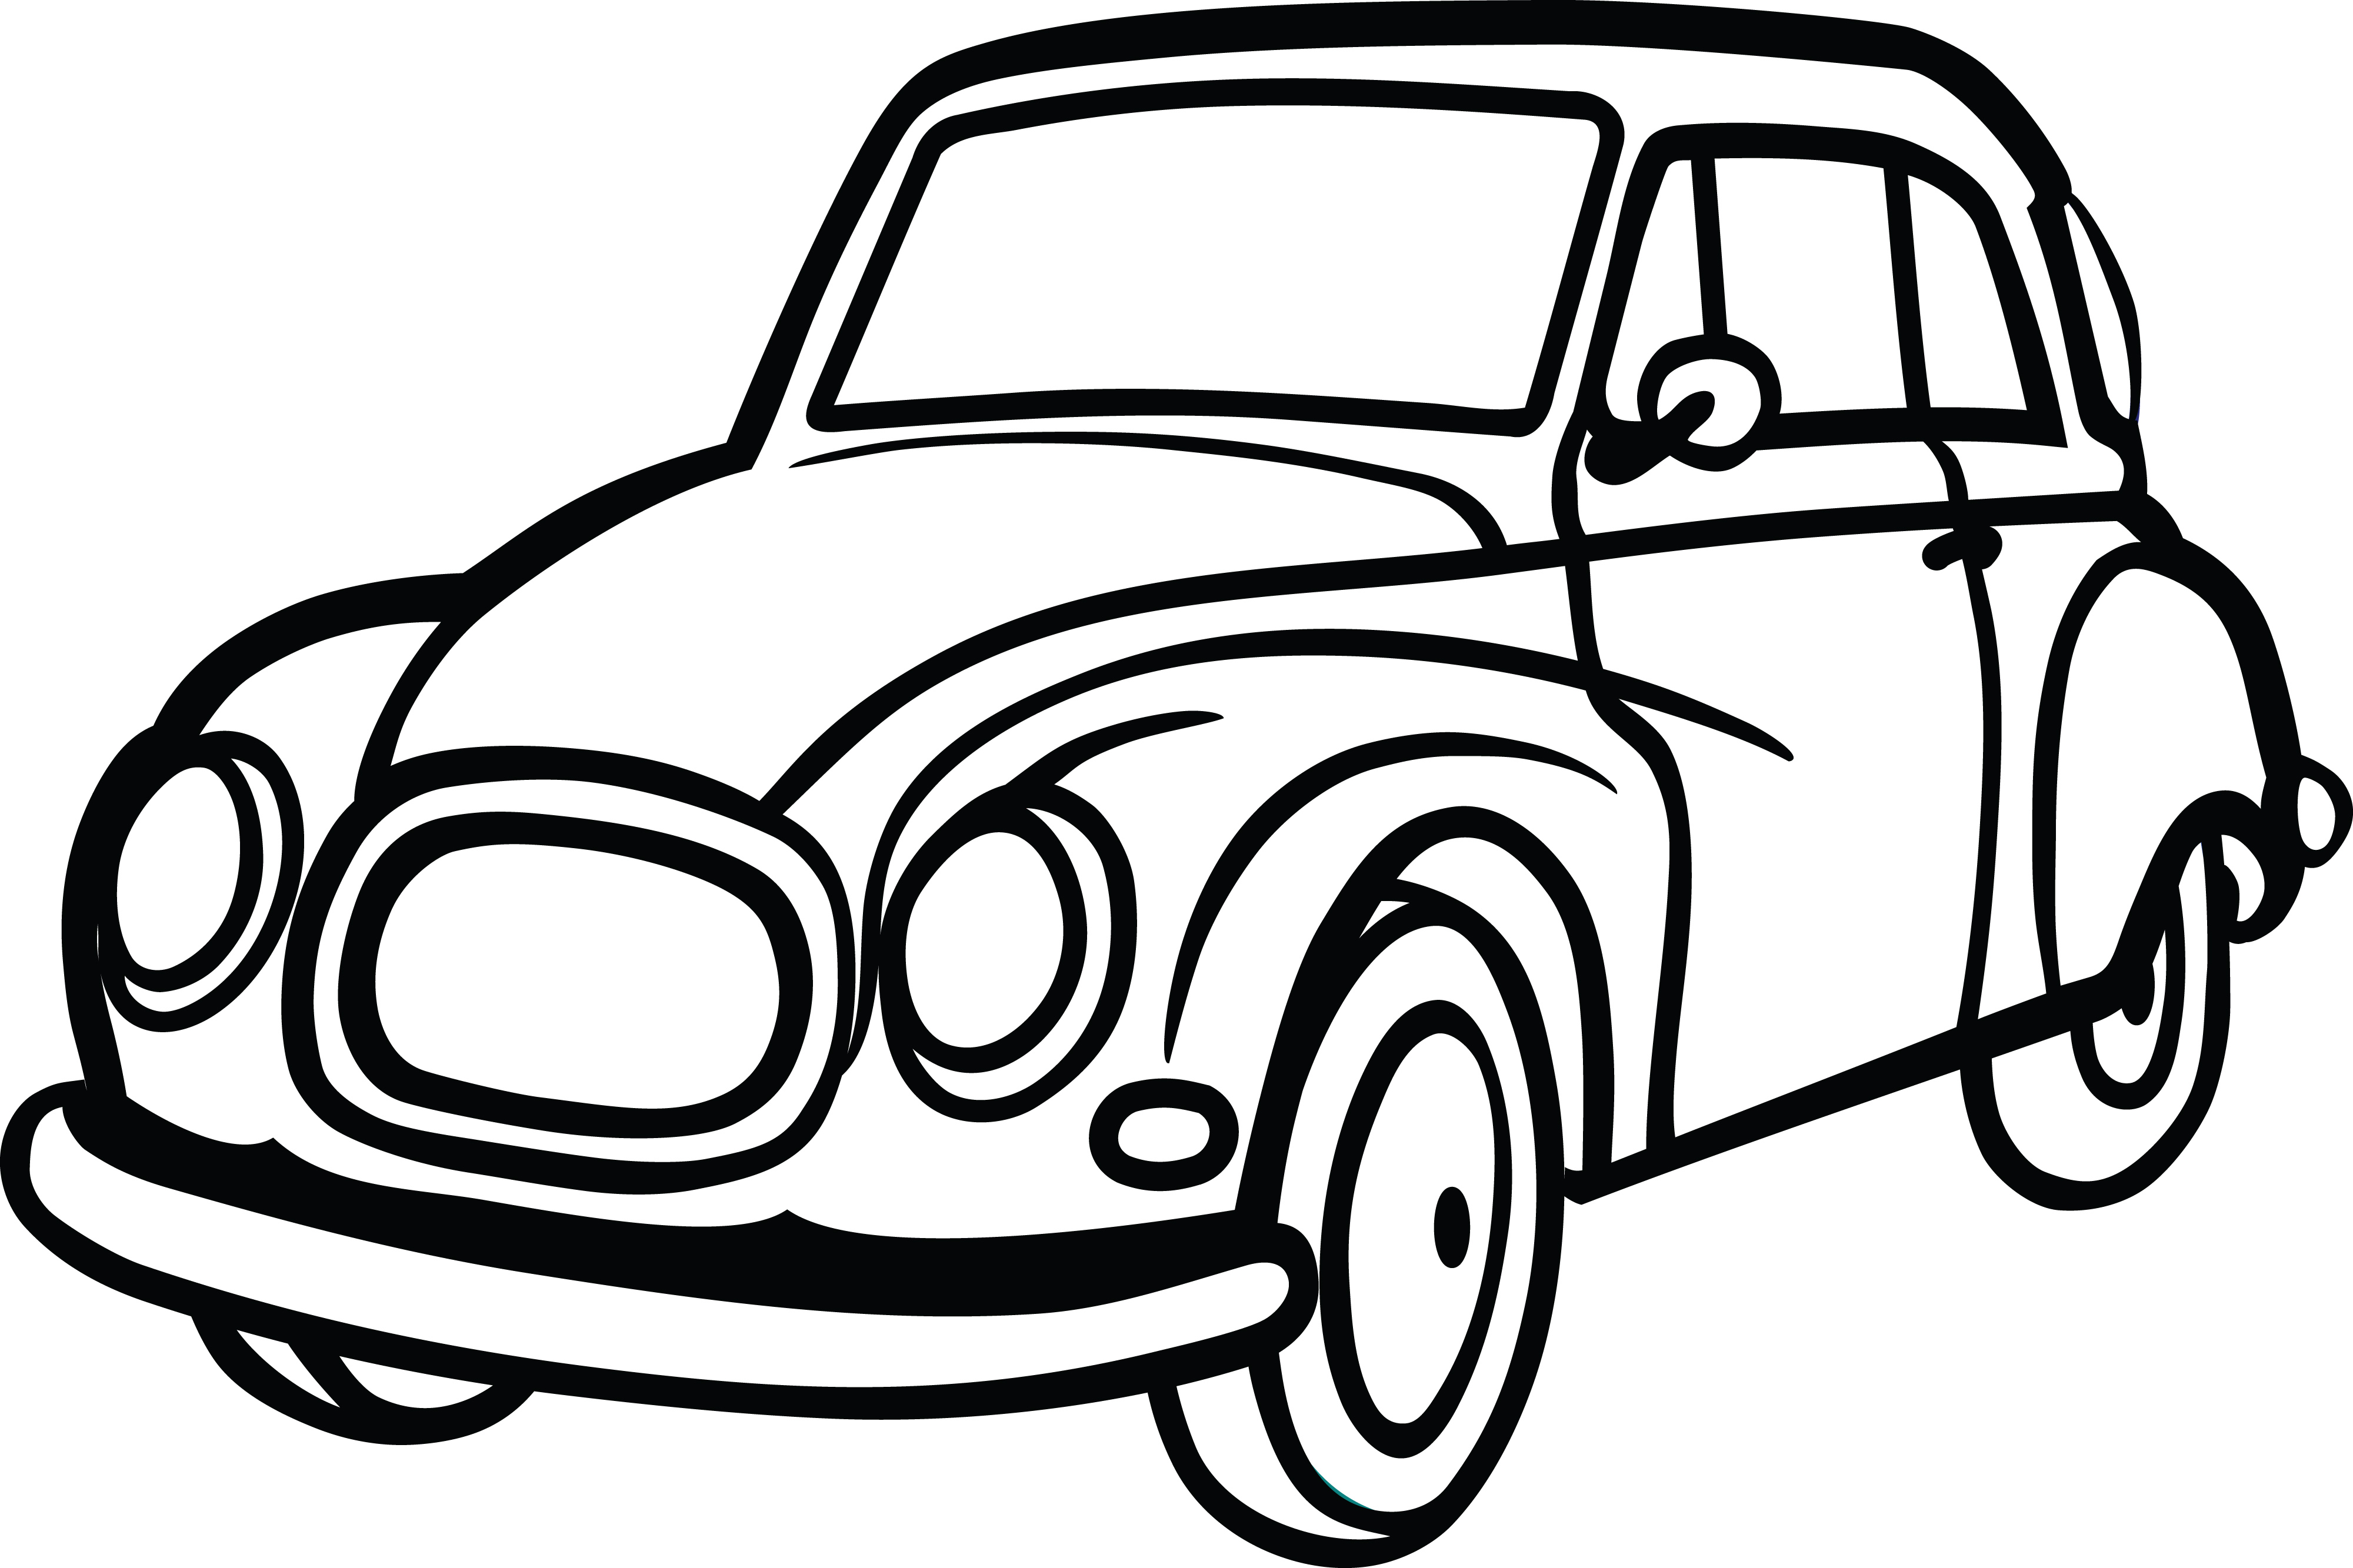 free clipart image of a car - photo #38